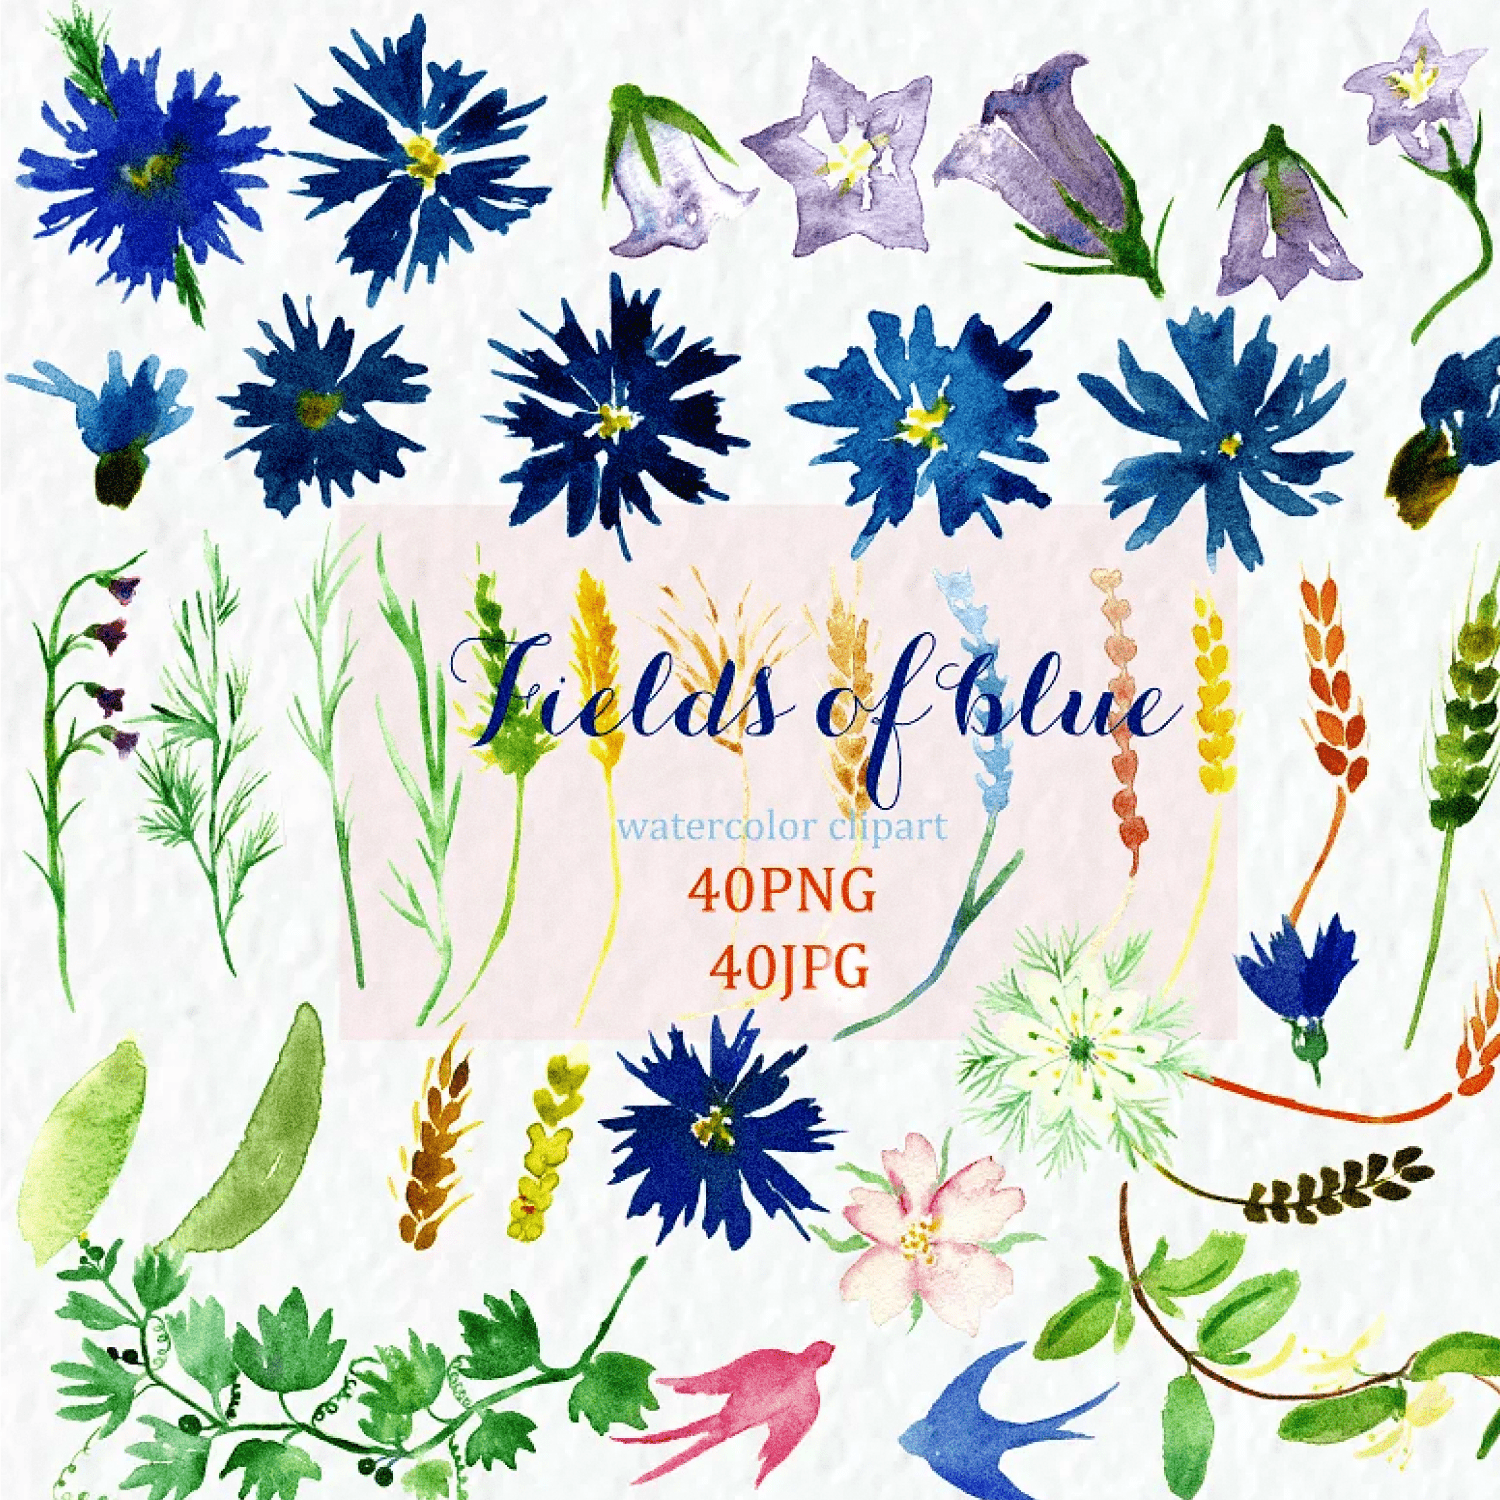 Fields of blue Watercolor clipart created by LABFcreations.